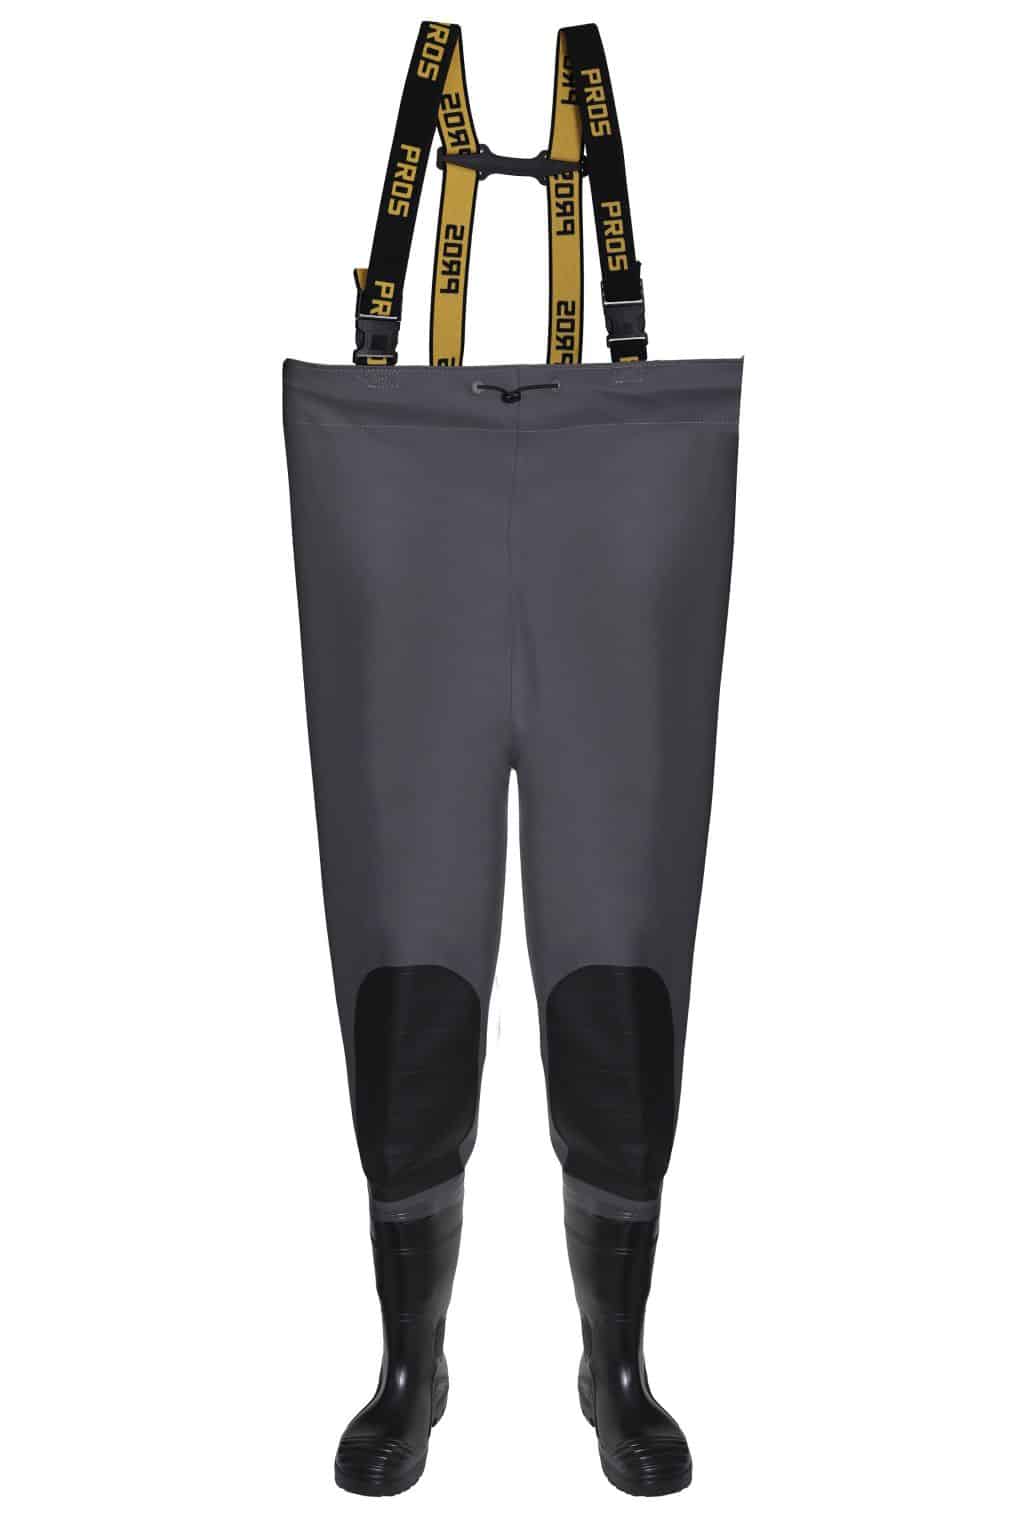 chest waders fishing boots